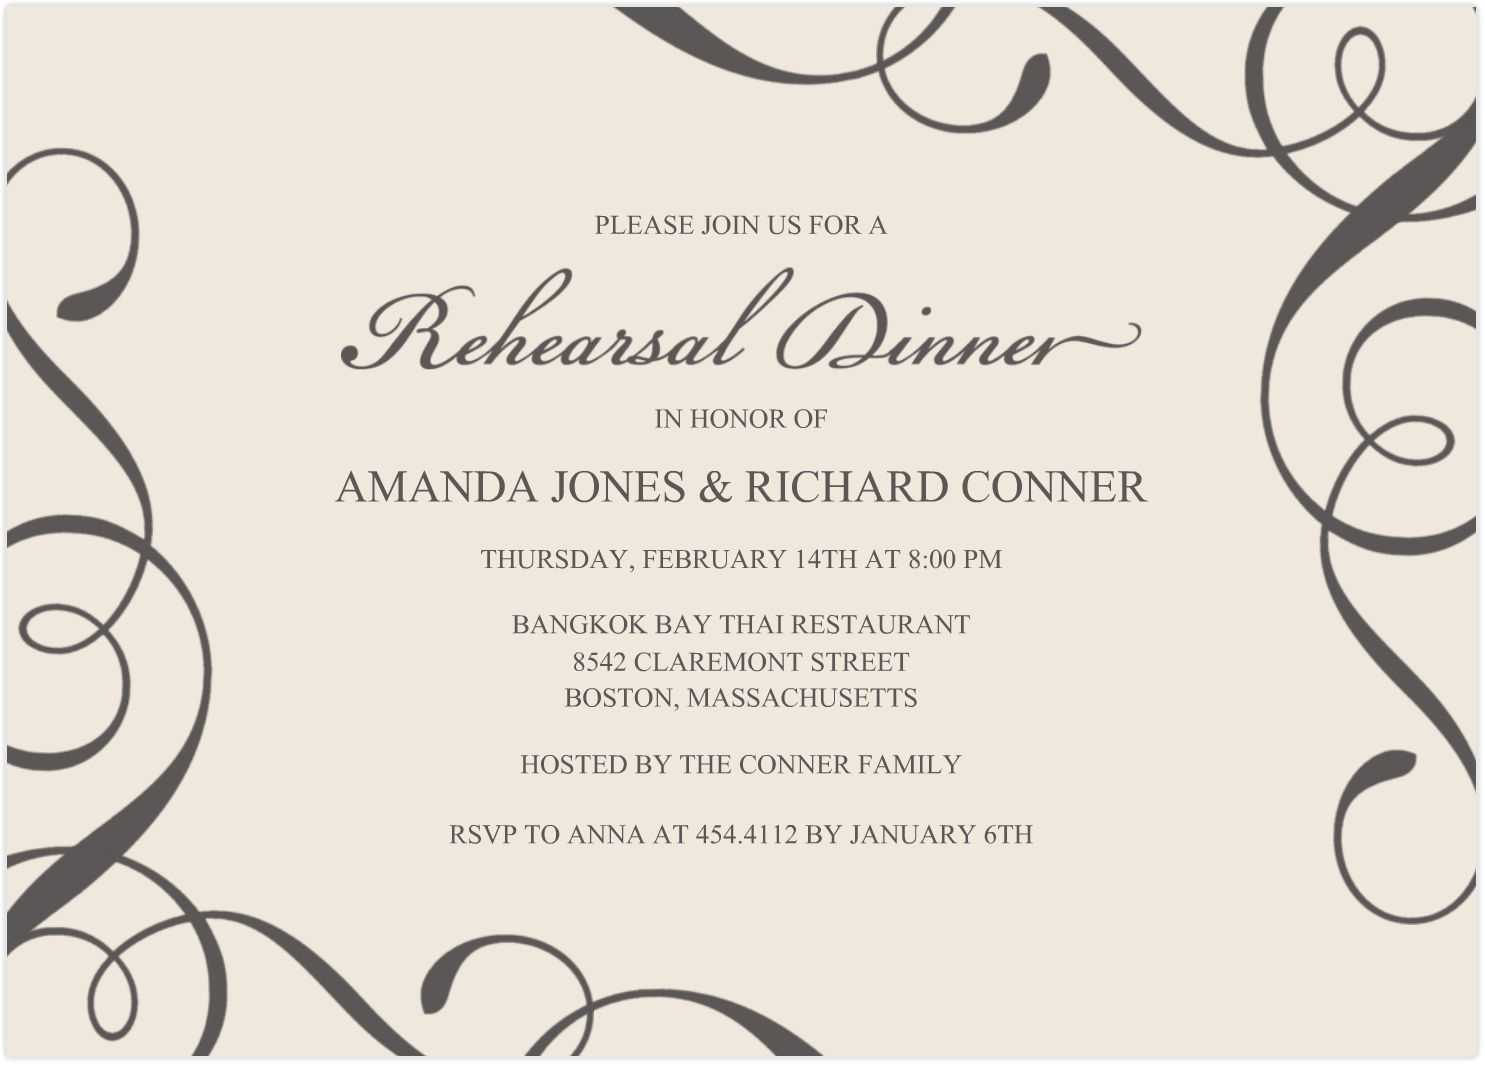 Free Downloadable Invitation Templates Word - Dalep Regarding Free Dinner Invitation Templates For Word